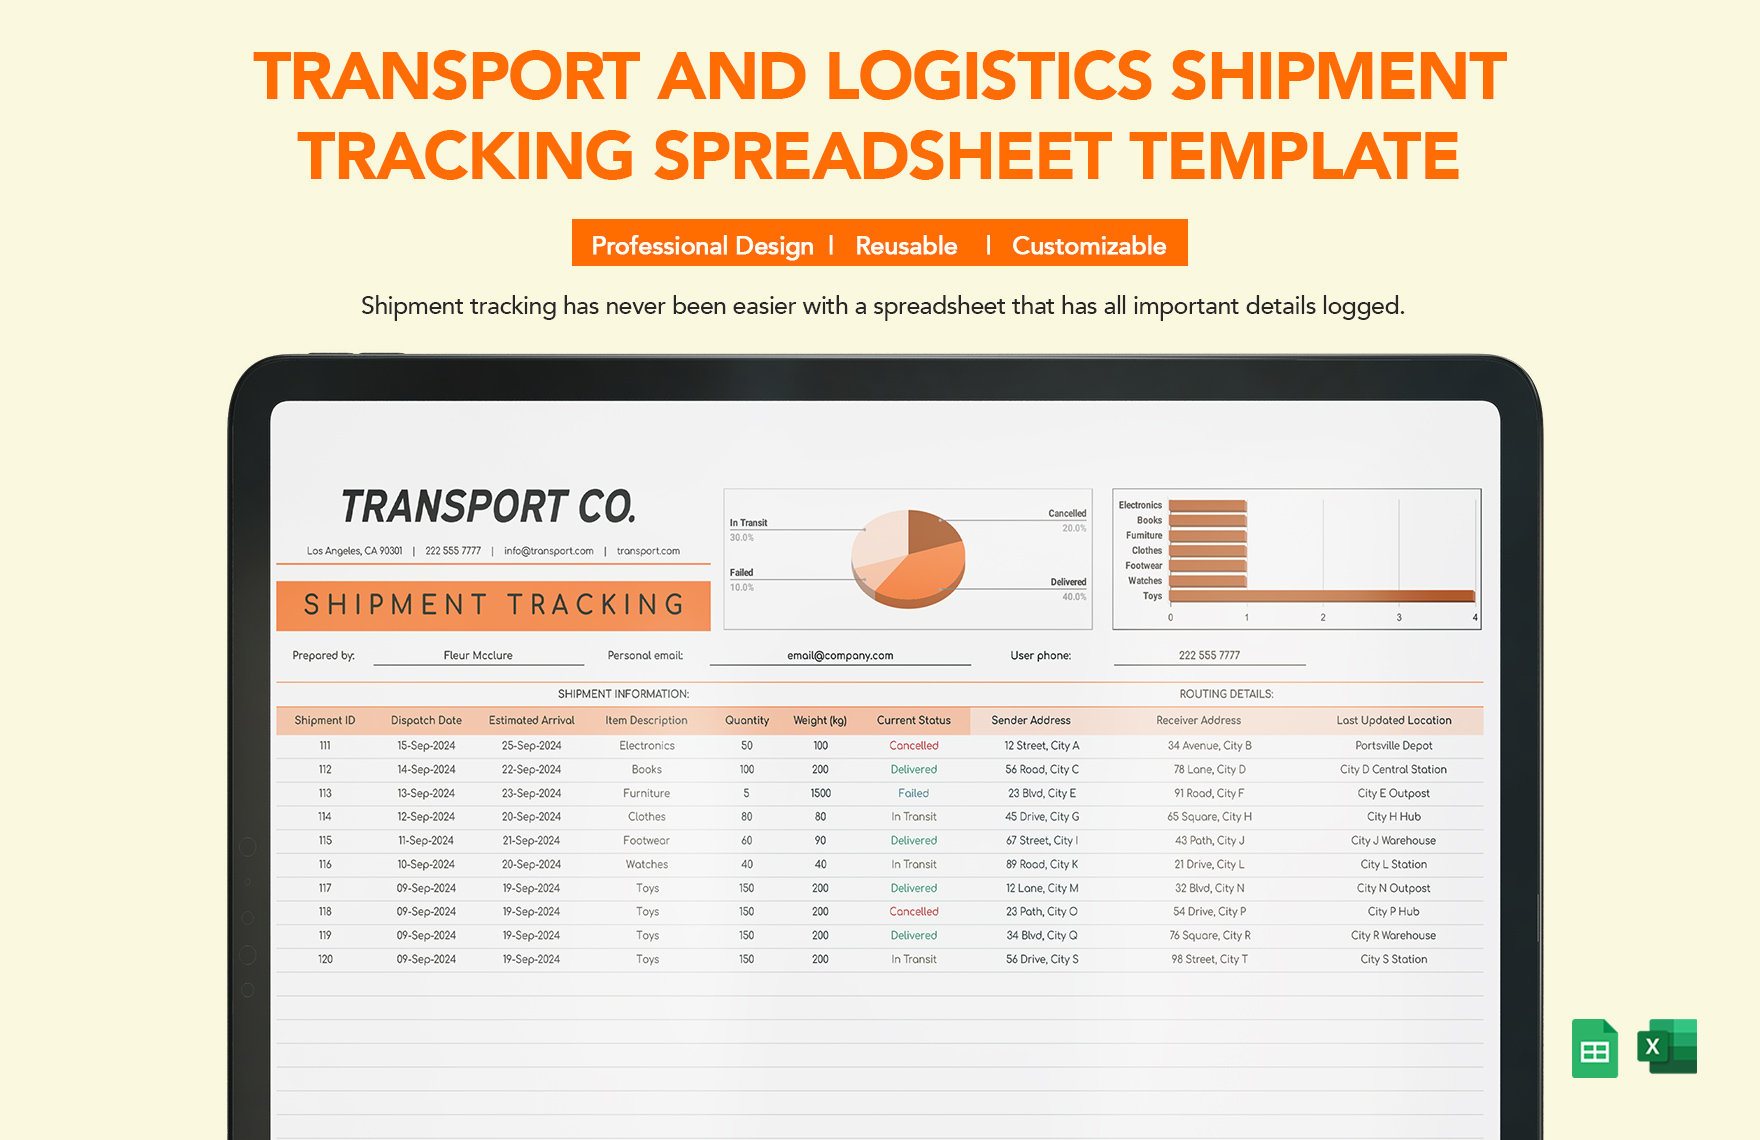 Free Transport and Logistics Shipment Tracking Spreadsheet Template in Excel, Google Sheets